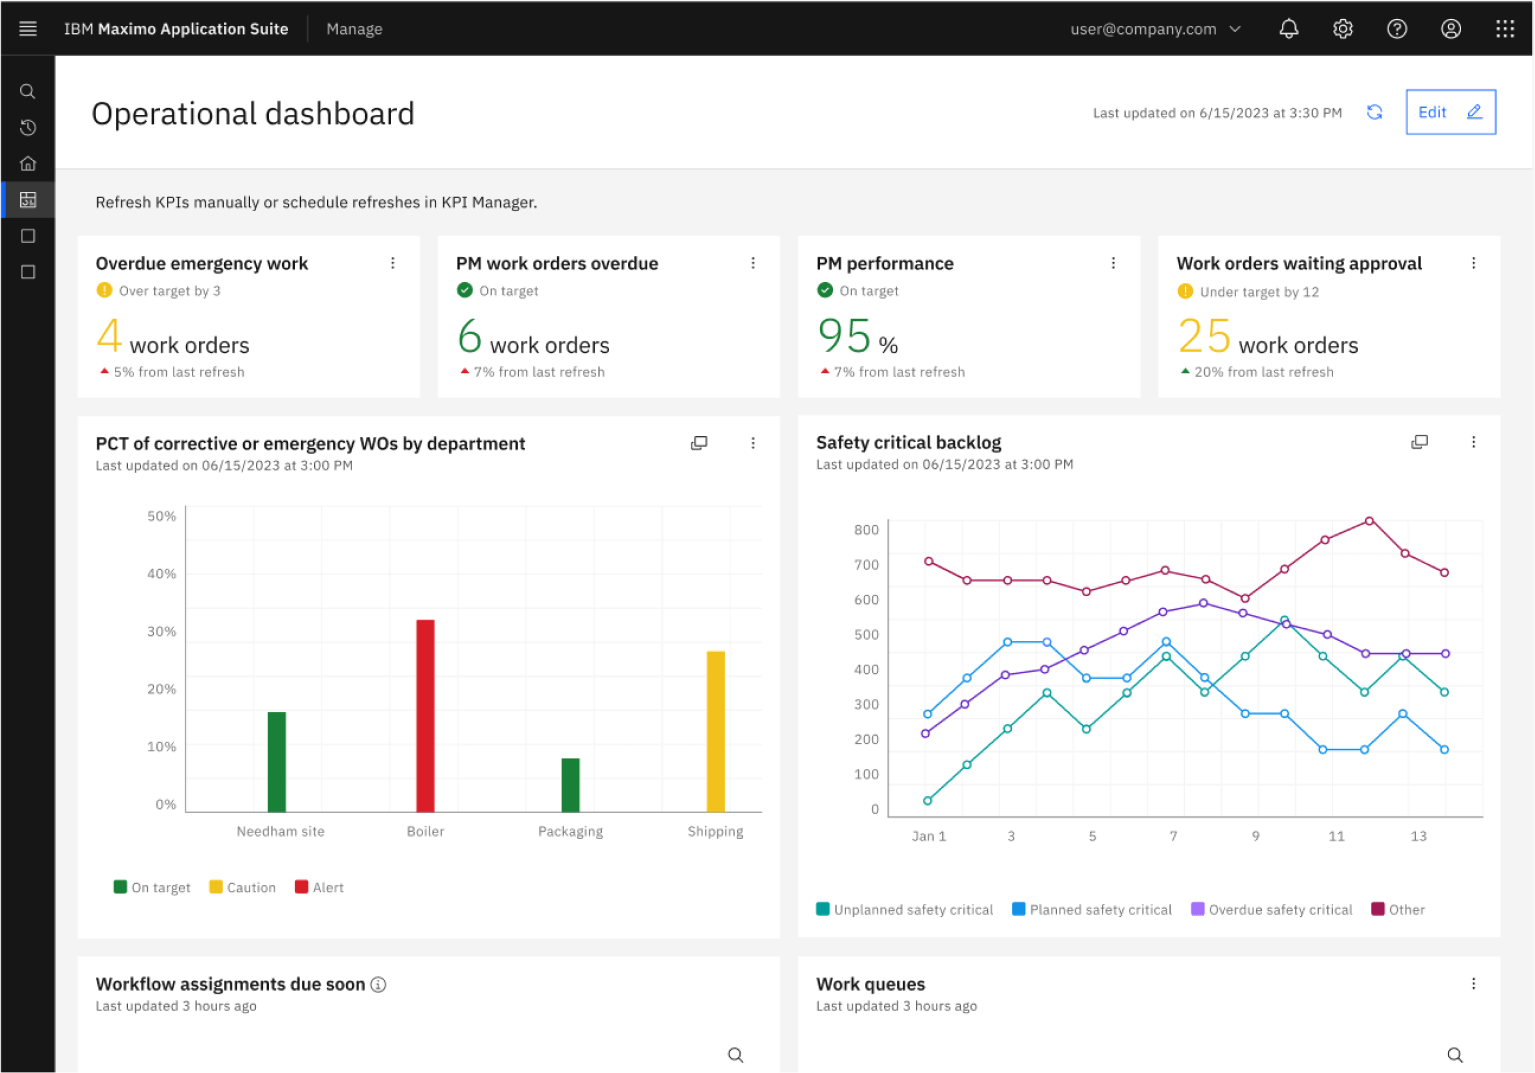 Screen capture showing Maximo operational dashboard with status overview